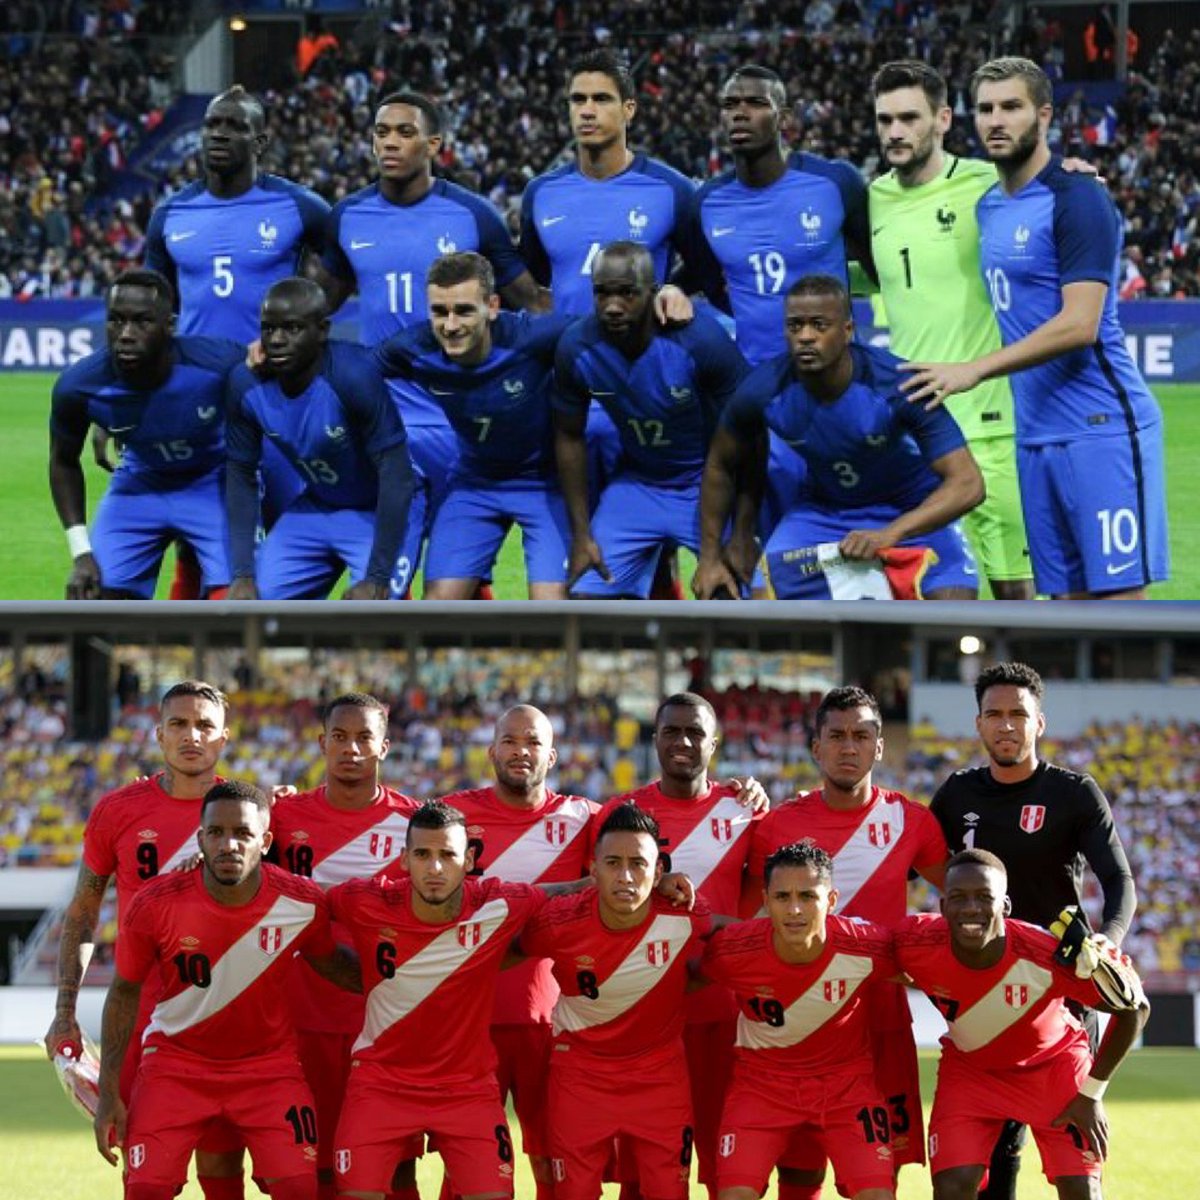 Will #FRA 🇫🇷 defeat #PER 🇵🇪 to take the advantage in Group C, plus secure their place in the Round of 16? DigicelPredictions France 2 - 1 Peru.  Watch the #FRAPER match on Channel 350 at 10am|ST 11am|ET. #WorldCup #DigicelSummerOfSports #WC2018 #Russia